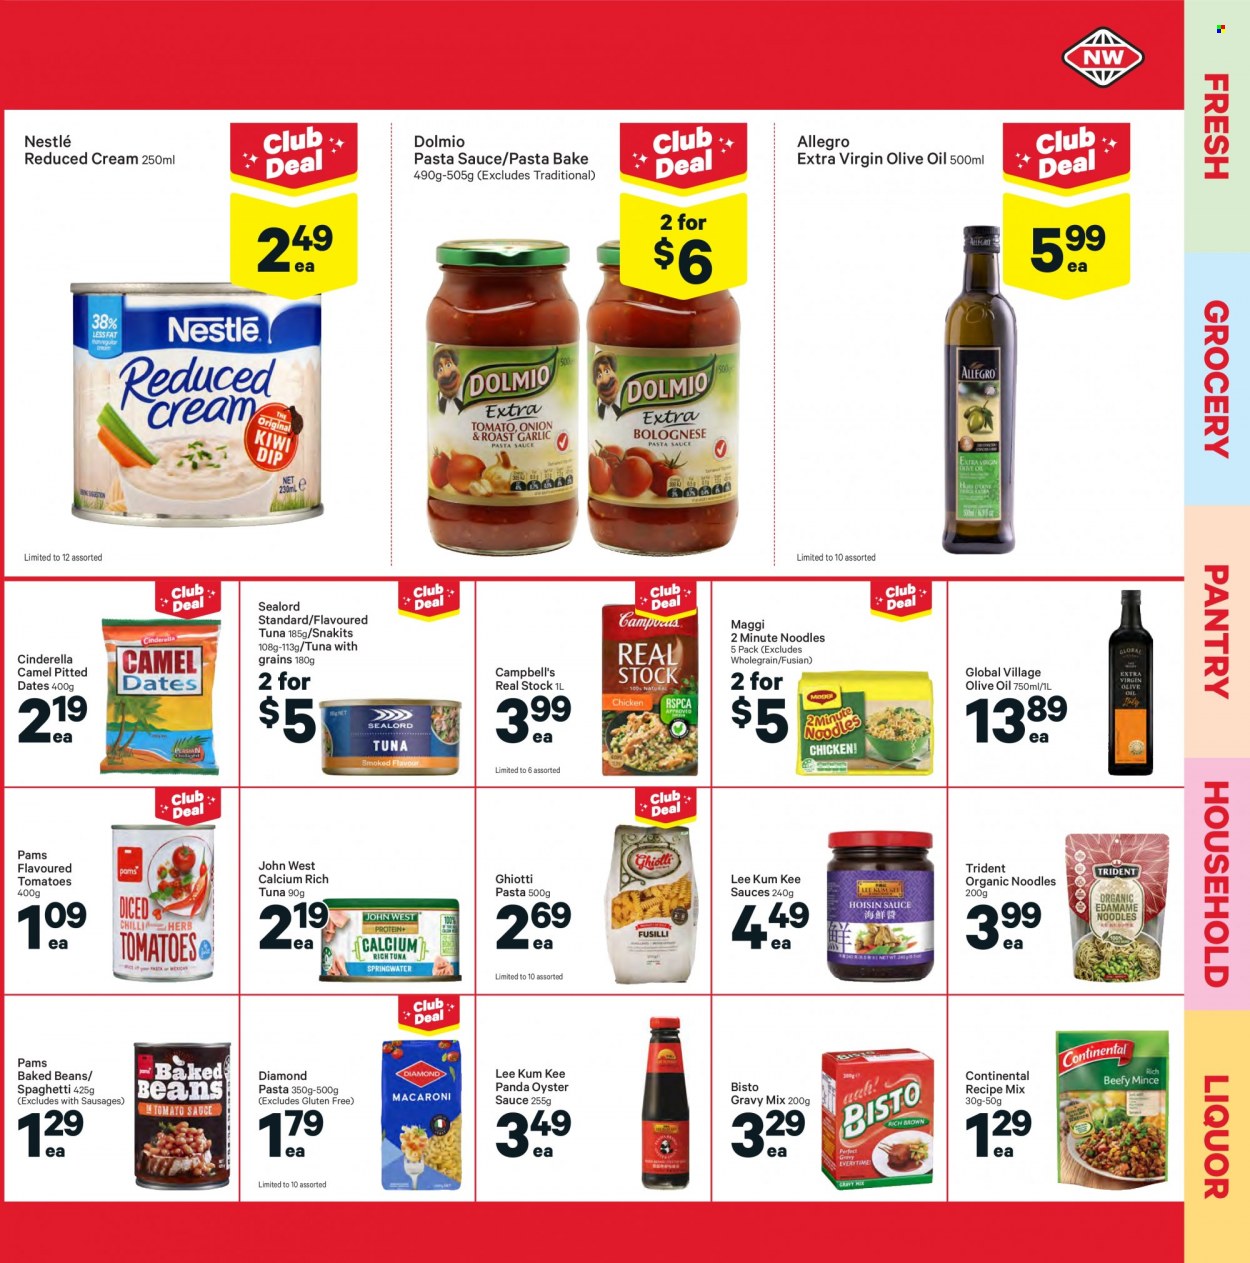 thumbnail - New World mailer - 13.09.2021 - 19.09.2021 - Sales products - beans, garlic, tomatoes, kiwi, tuna, oysters, Sealord, Campbell's, spaghetti, pasta sauce, macaroni, noodles, Continental, sausage, Nestlé, Trident, Maggi, baked beans, gravy mix, hoisin sauce, oyster sauce, Lee Kum Kee, extra virgin olive oil, olive oil, oil, Camel, liquor. Page 15.